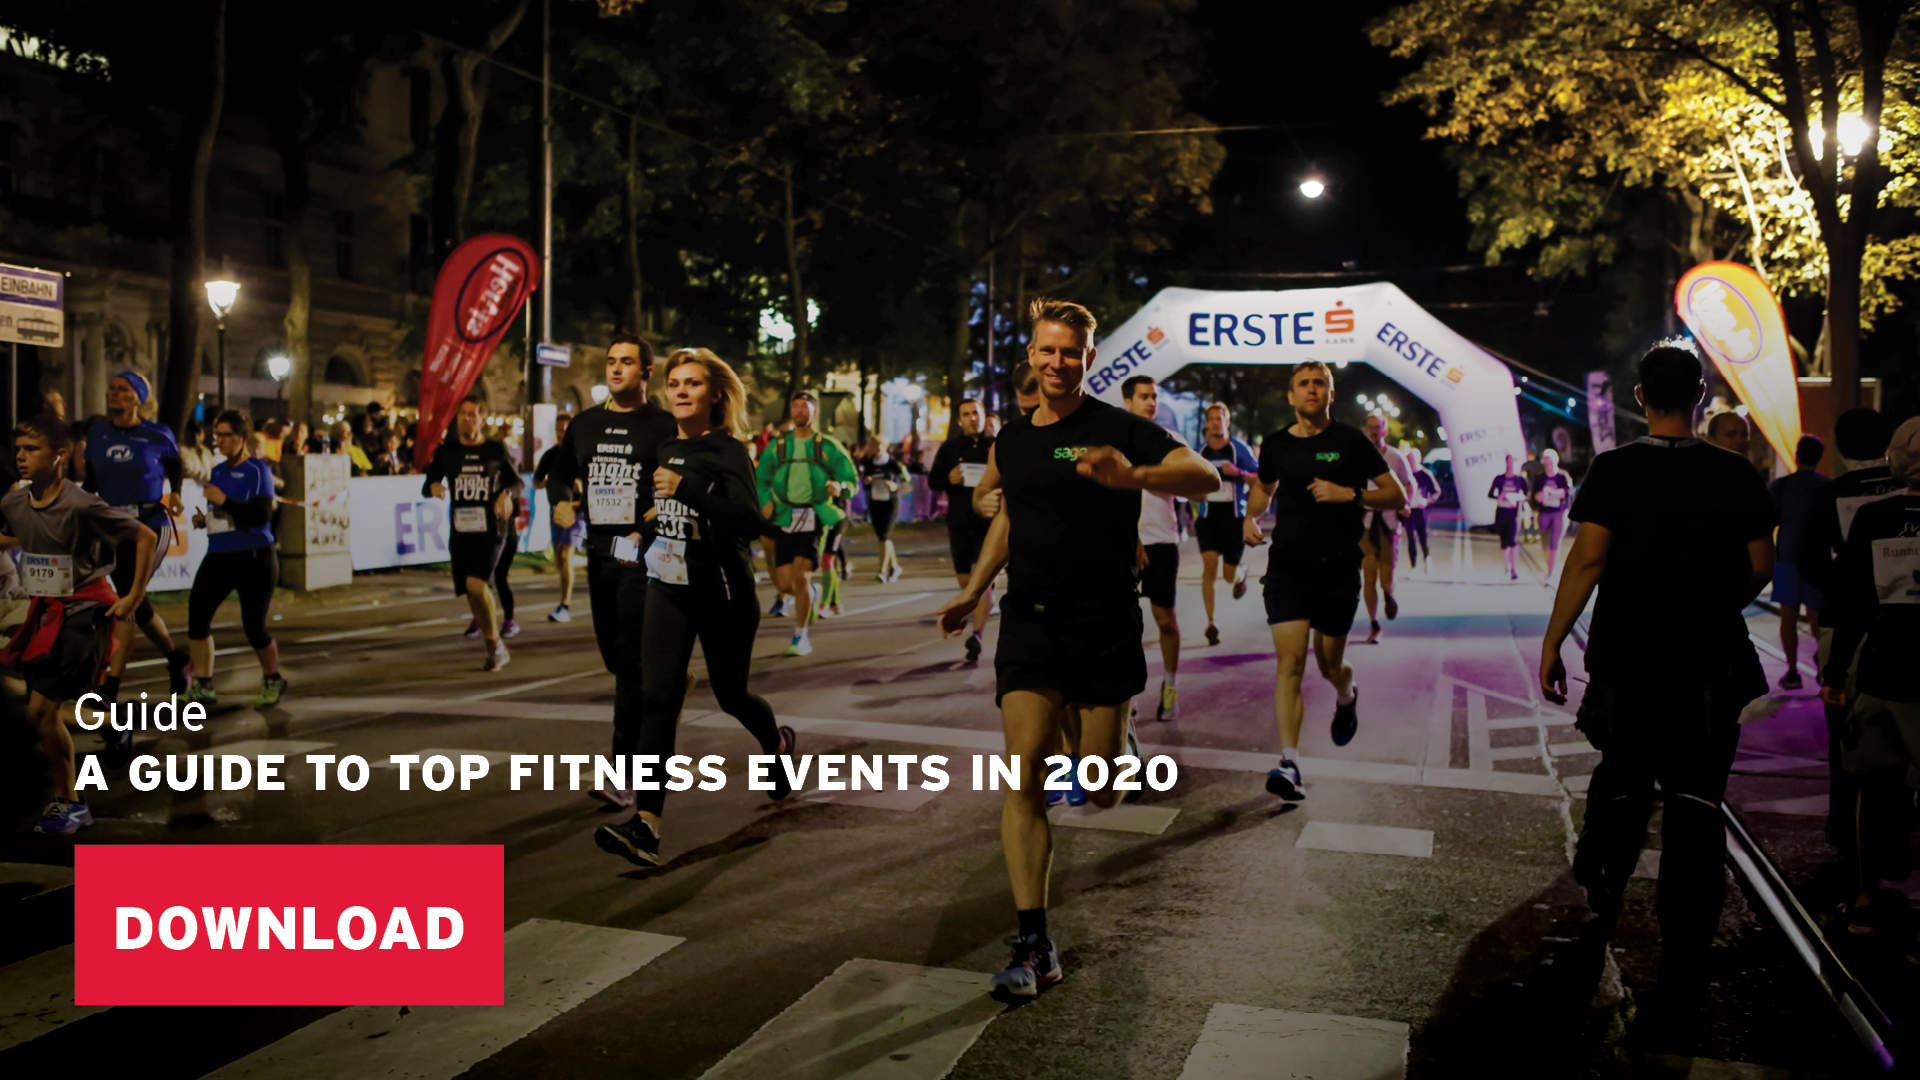 A guide to top fitness events in 2020